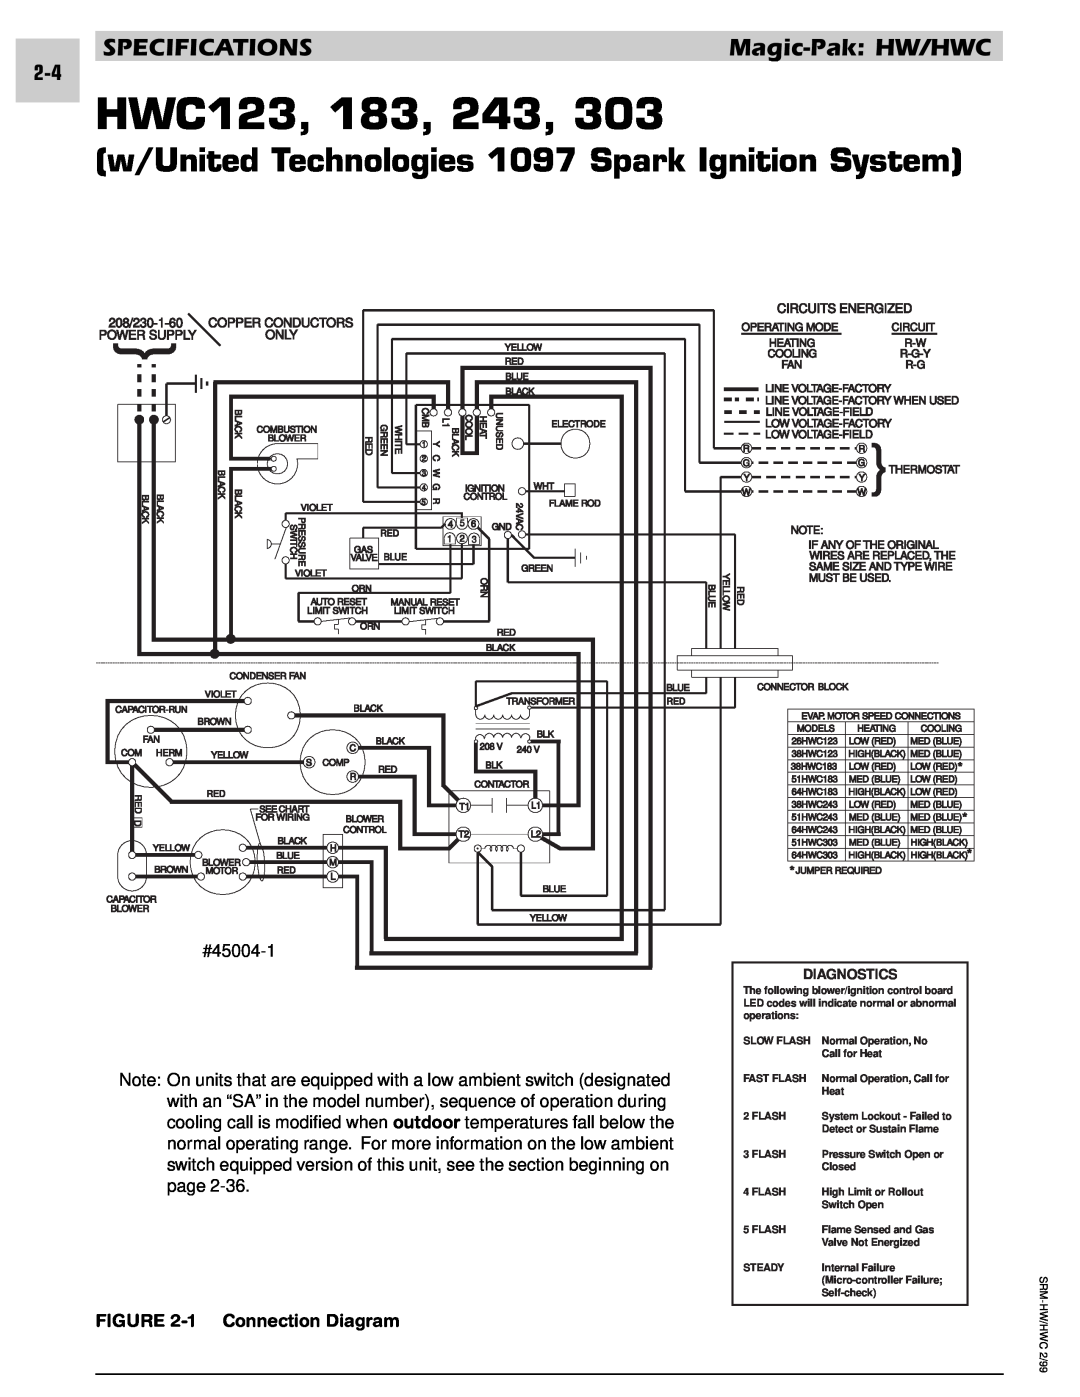 Armstrong World Industries 182 HWC123, 183, 243, w/United Technologies 1097 Spark Ignition System, 1 Connection Diagram 